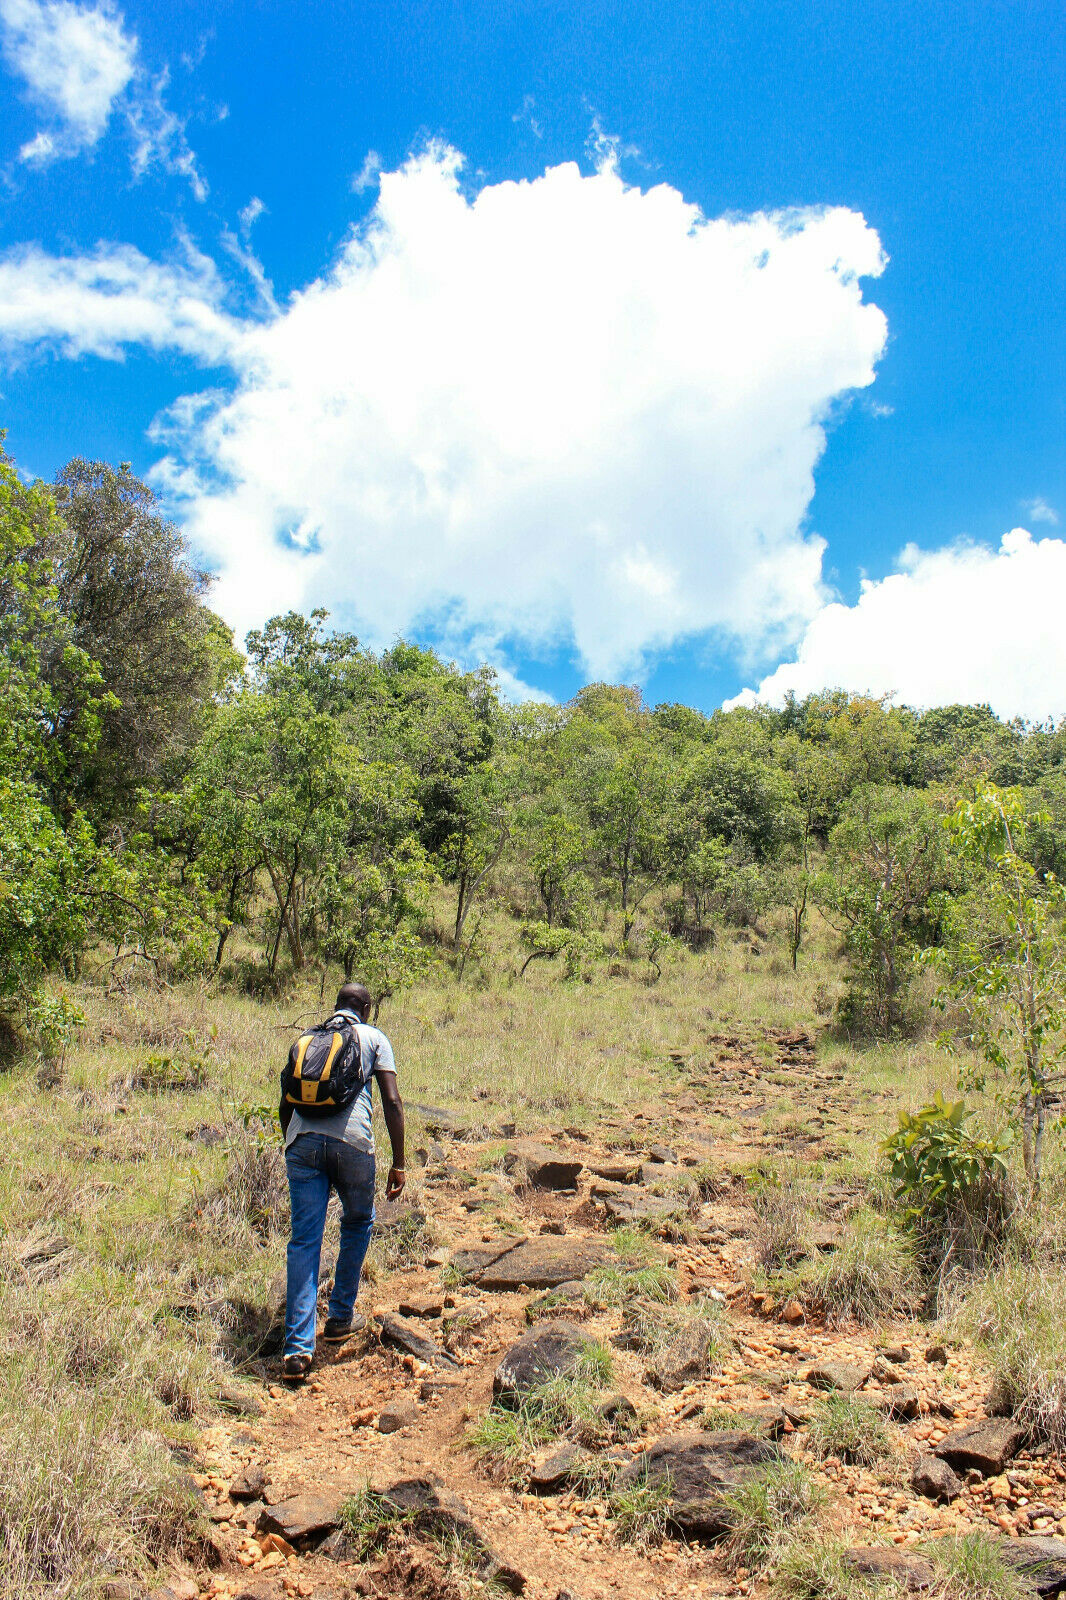 Moderate Hiking And Trekking In Kenya (9 Days) (price For 2 Travellers)